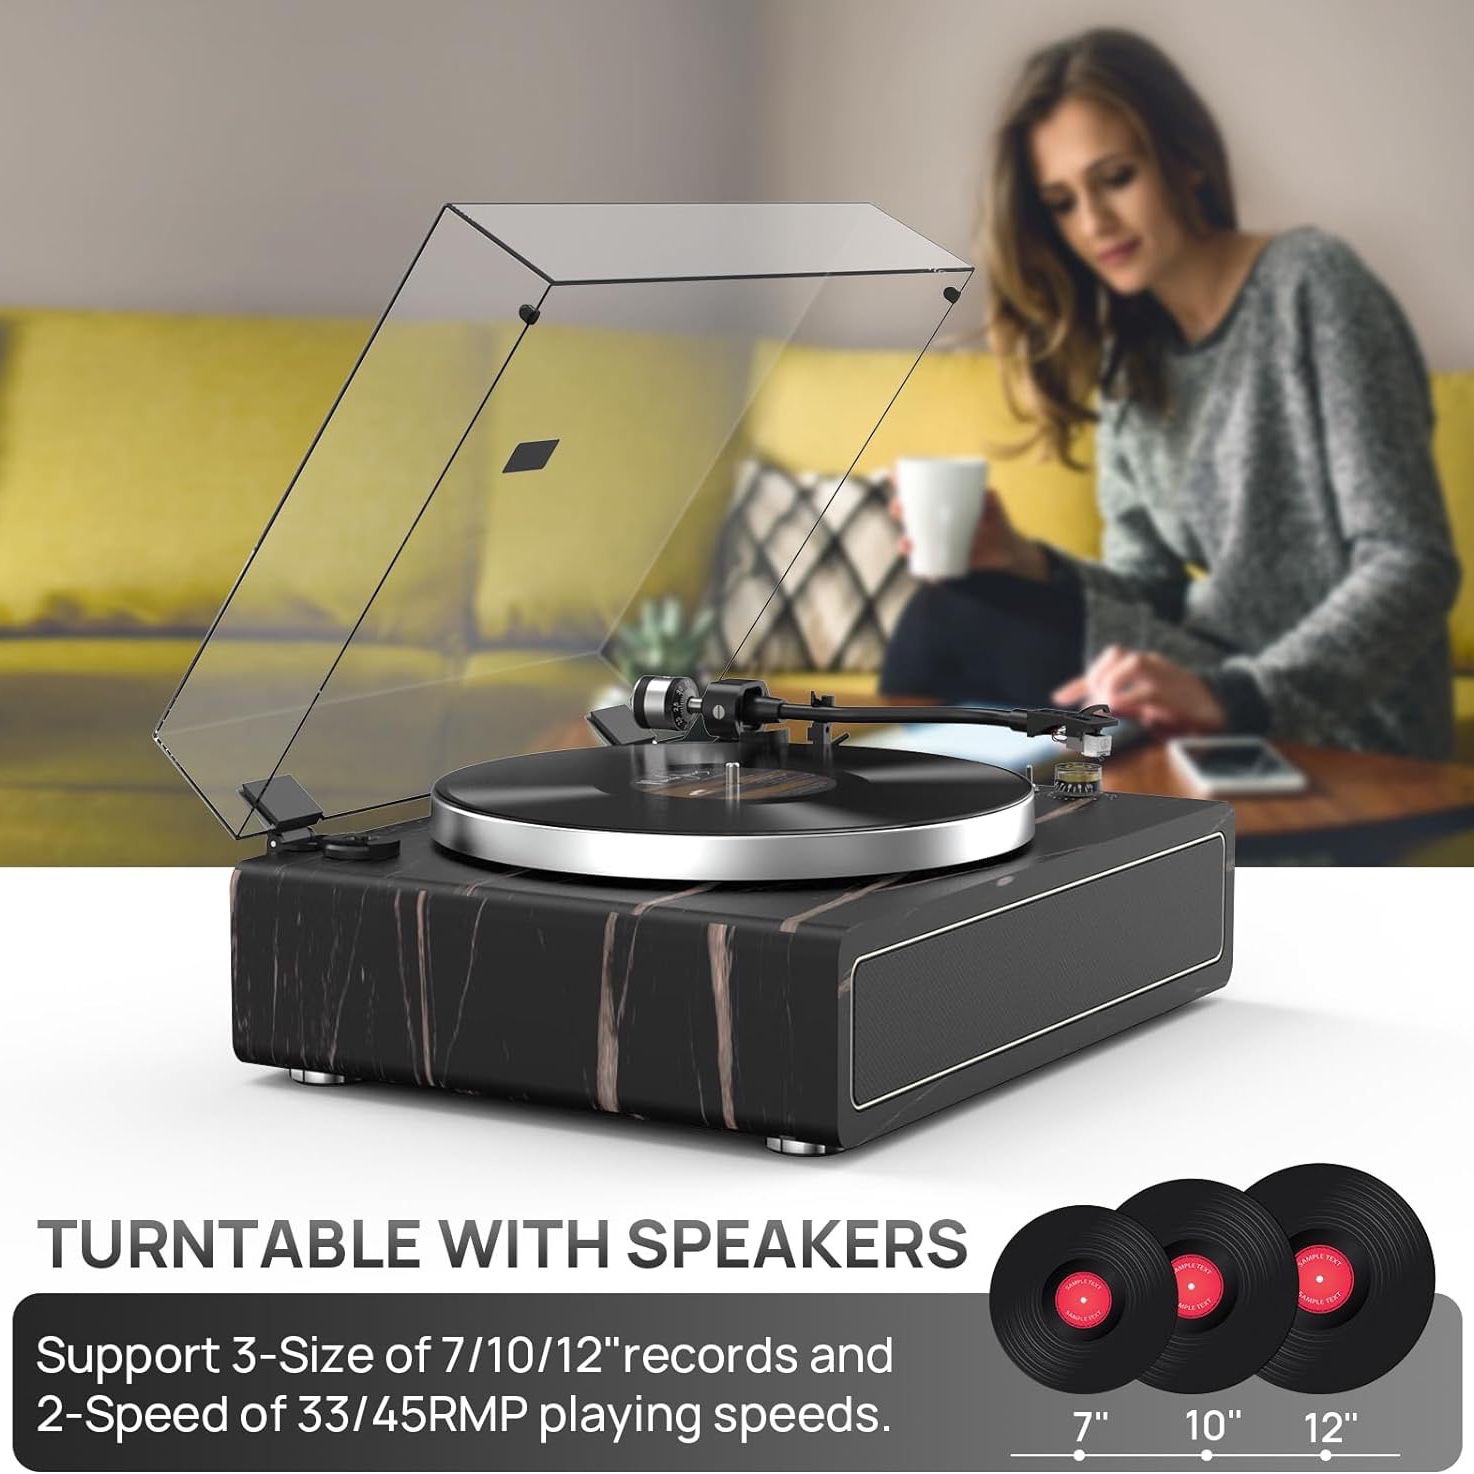 Turntable Record Player with Built-in Speakers, Vinyl Record Player Support Wireless Playback Auto Stop 33&45 RPM Speed RCA Line Out AUX in All-in-one